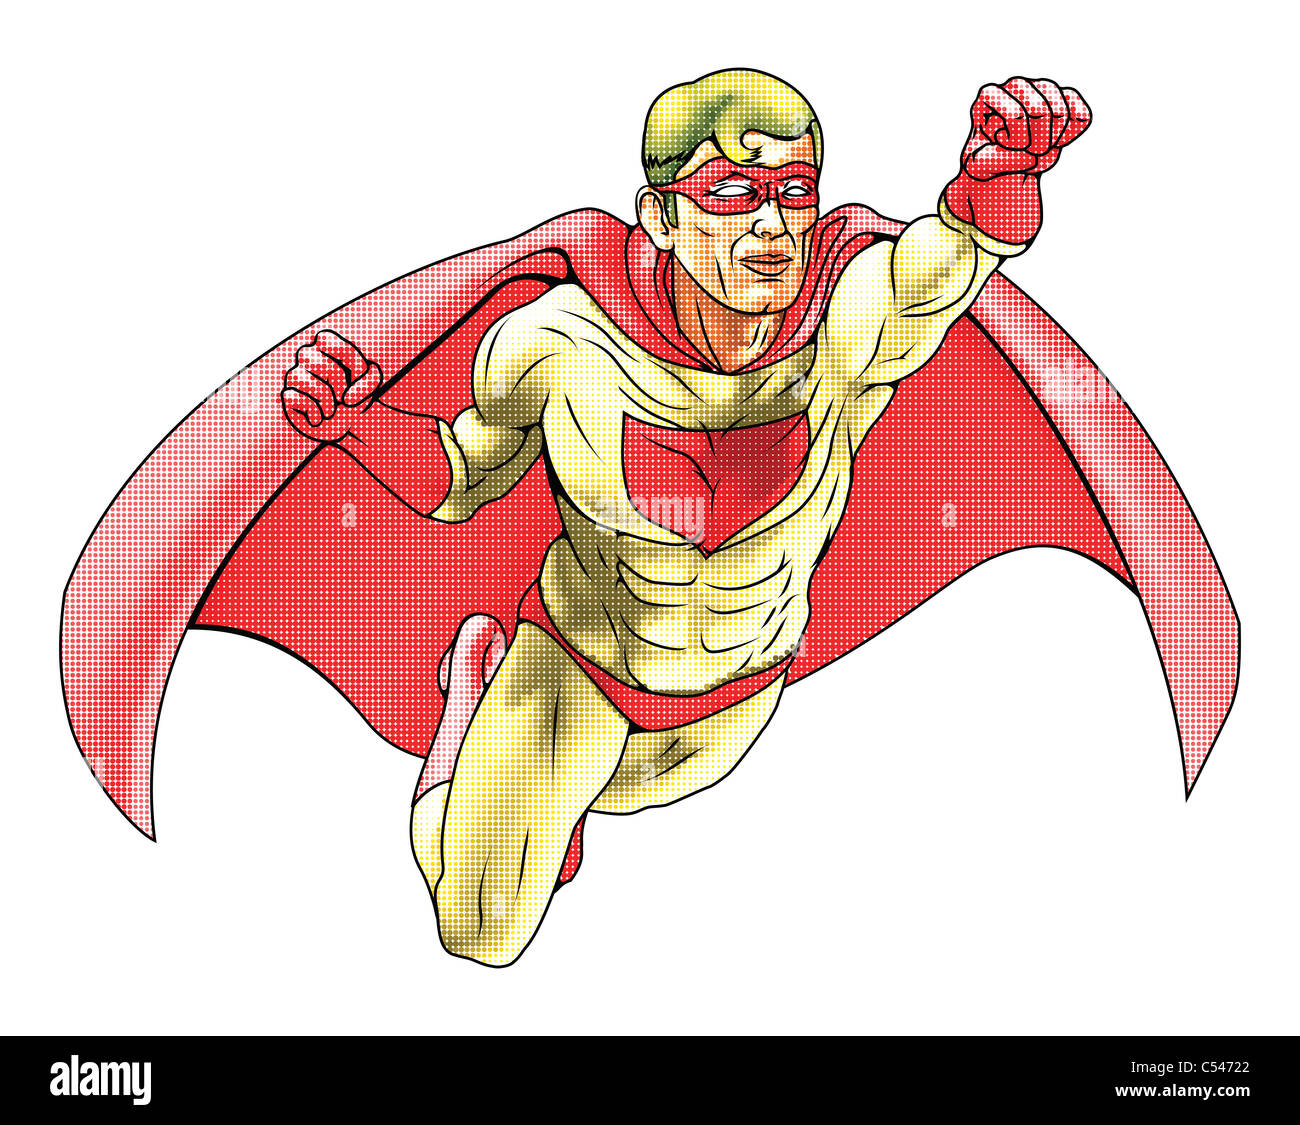 Illustration of super hero dressed in red and yellow costume and cape flying. Haftone style for traditional comic book art look. Stock Photo